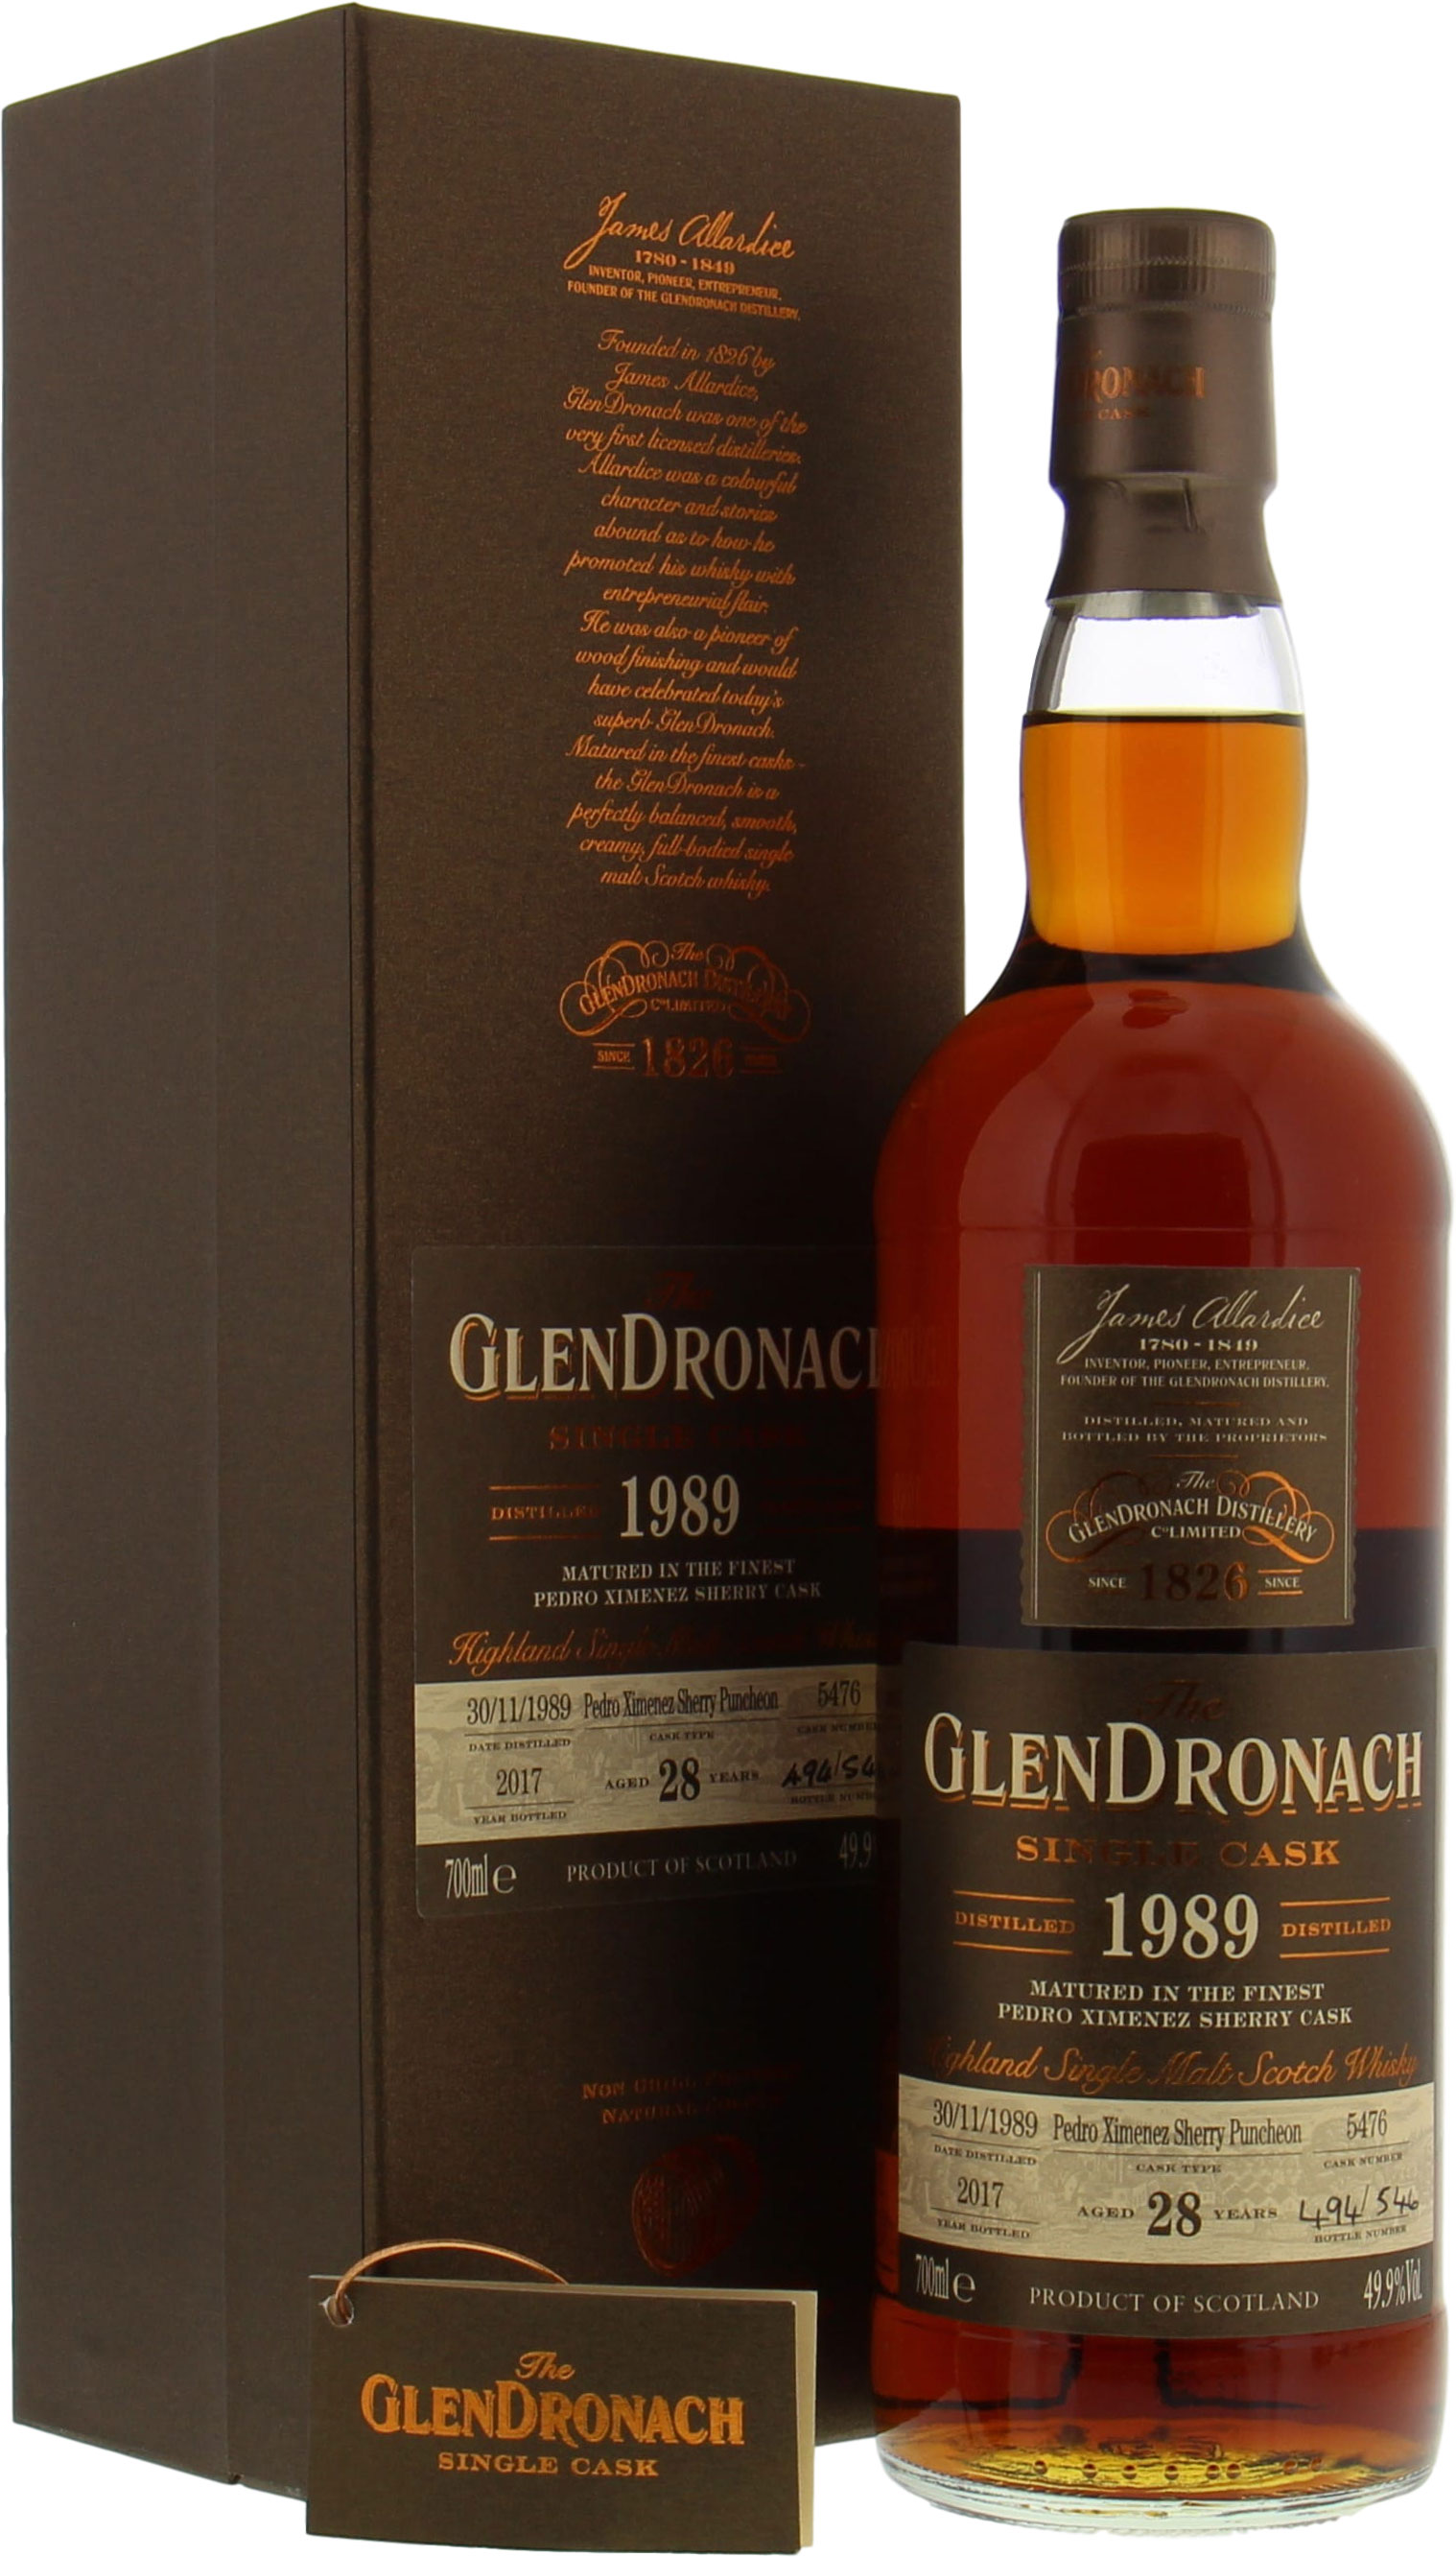 Glendronach - 28 Years Old Batch 16 Single Cask 5476 49.9% 1989 In Original Container